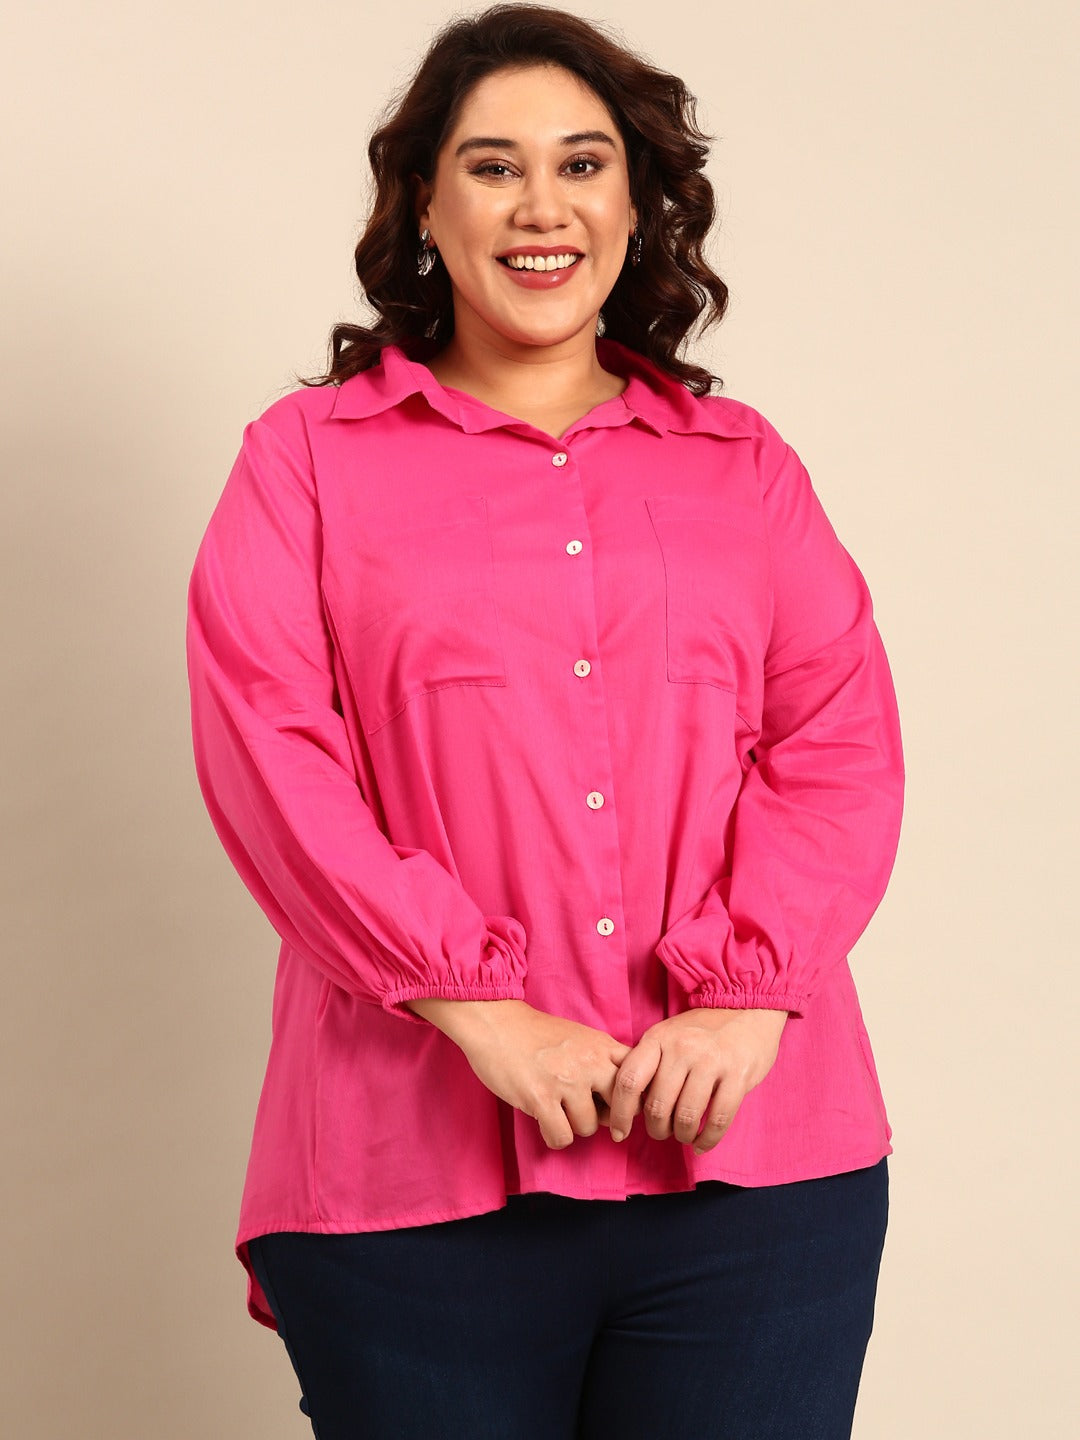 PINK SHIRT WITH BIG SLEEVES